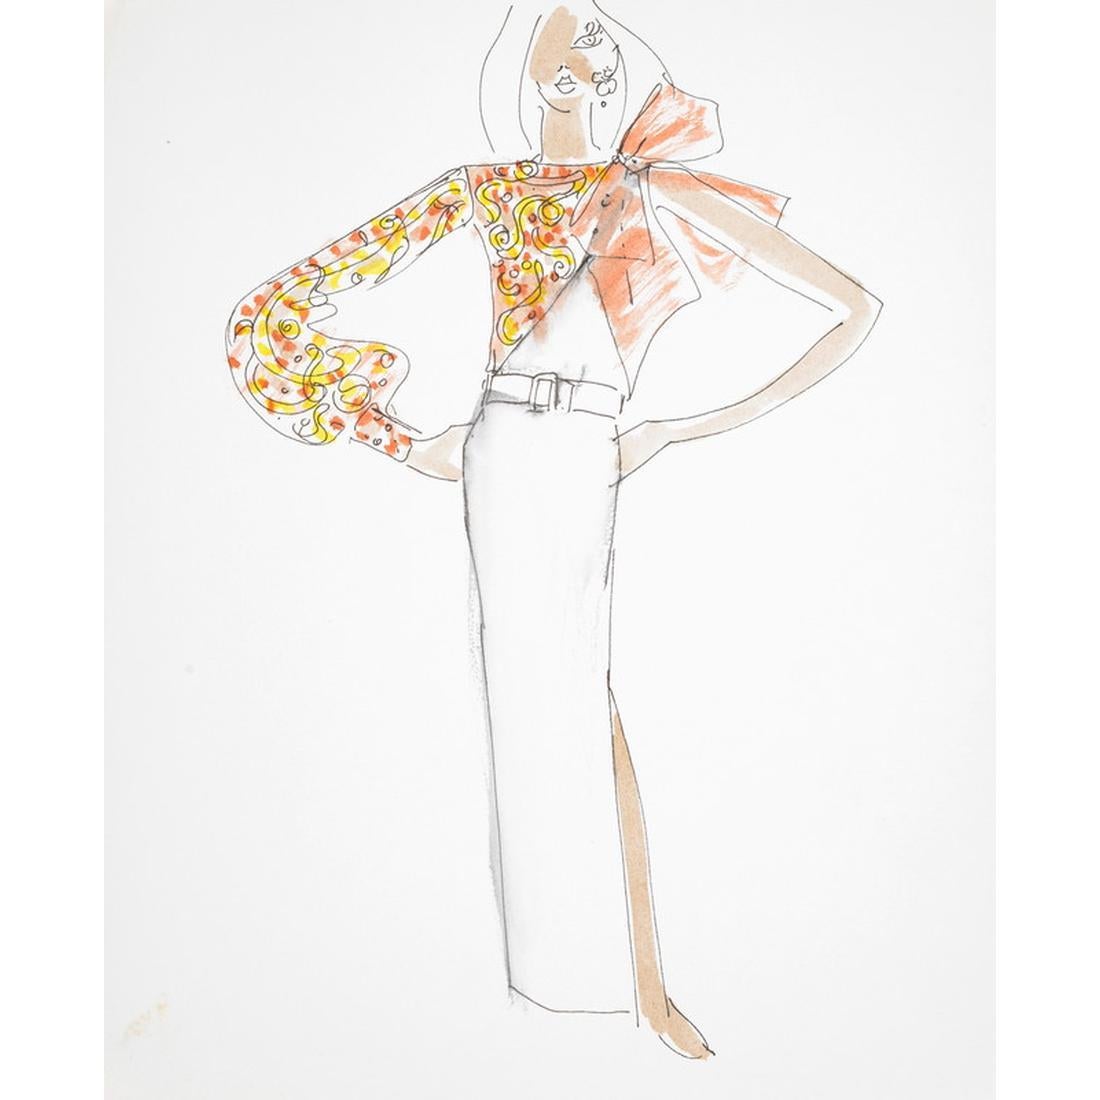 Artist/Designer: Karl Lagerfeld (German, 1933-2019)

Additional Information: Fashion design sketch by Karl Lagerfeld from the Tiziani Archives. Provenance: Estate of Tiziani  Estate of Raf Ravaioli  Private Collection, Palm Beach, FL.

Marking(s);